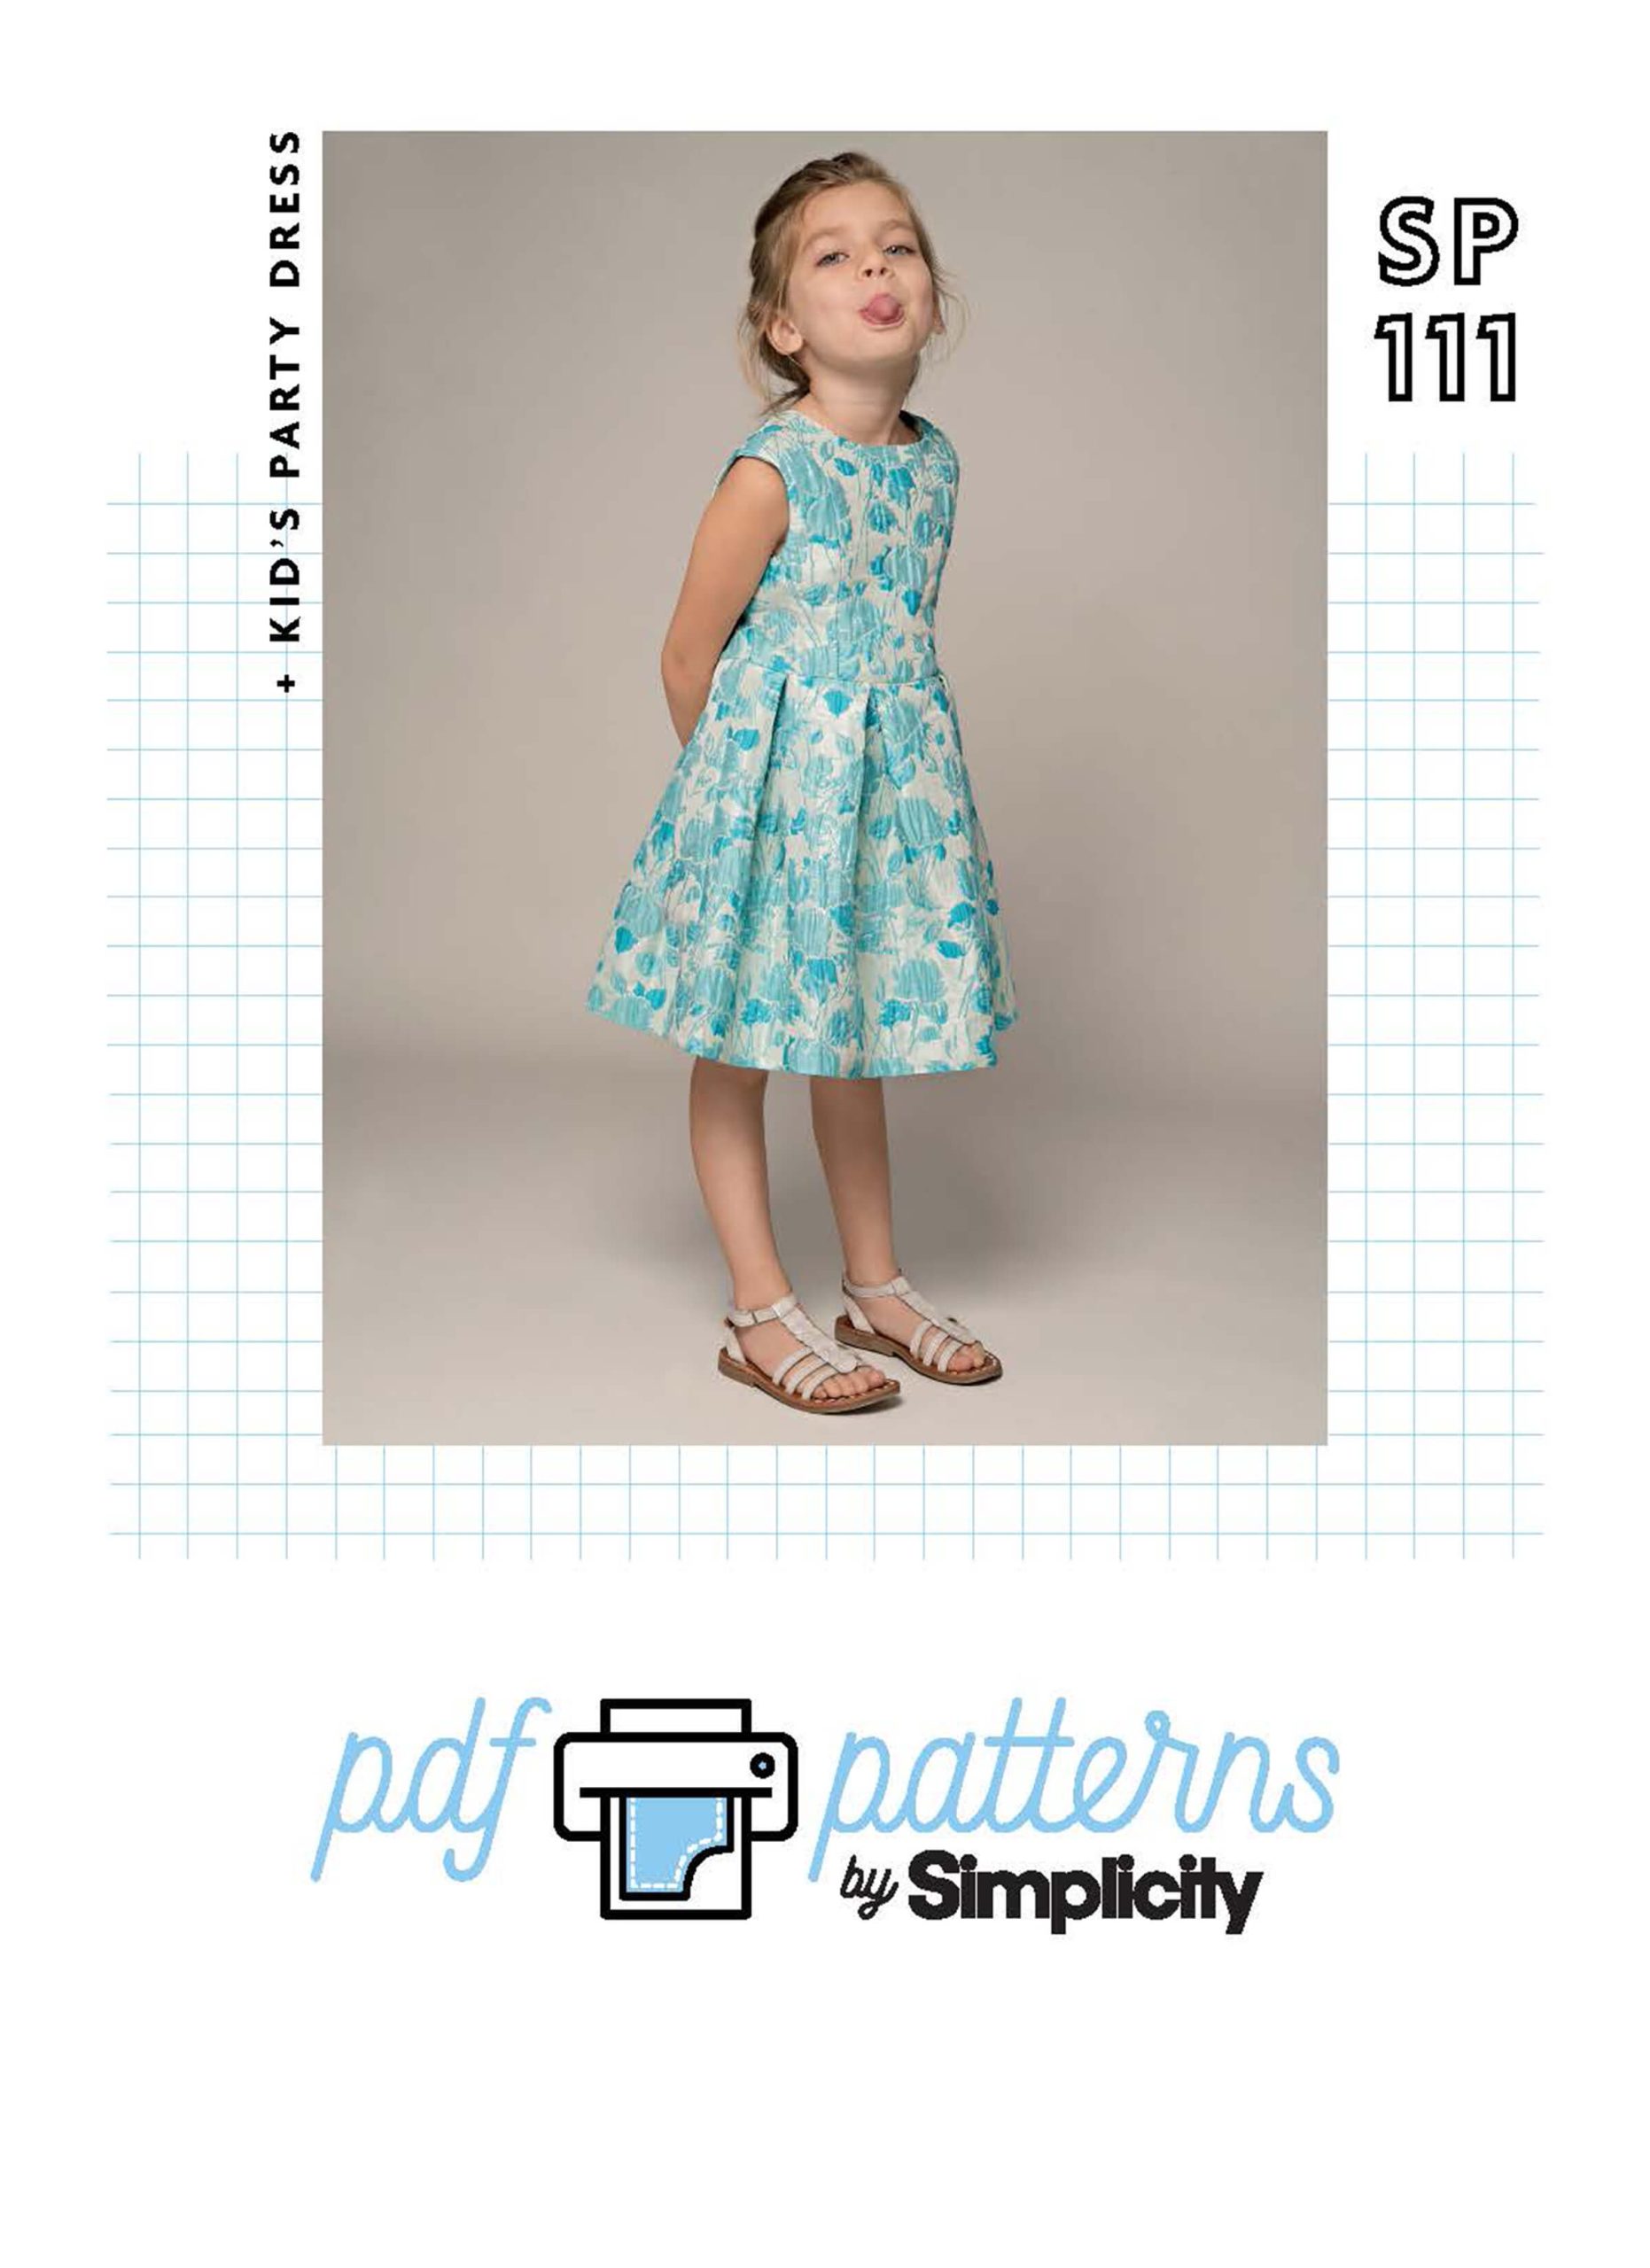 Simplicity PDF Sewing Pattern SP111 Child's Party Dress